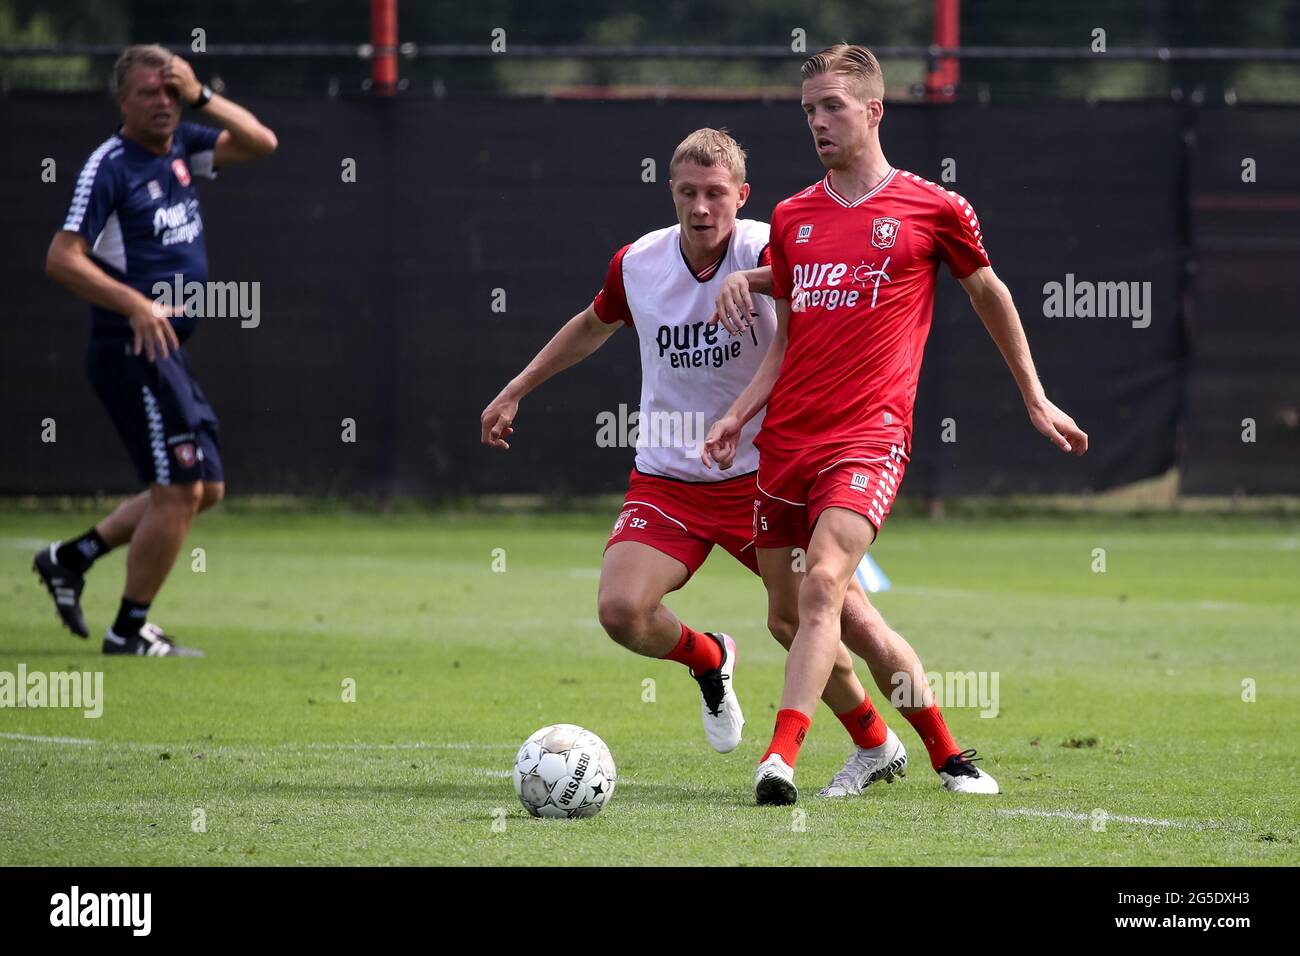 HENGELO, NETHERLANDS - JUNE 26: Jesse Bosch of FC Twente and Gijs Smal of FC Twente during the first Training Session of FC Twente of season 2021-2022 at Trainingscentrum Hengelo on June 26, 2021 in Hengelo, Netherlands. (Photo by Marcel ter Bals/Orange Pictures) Stock Photo